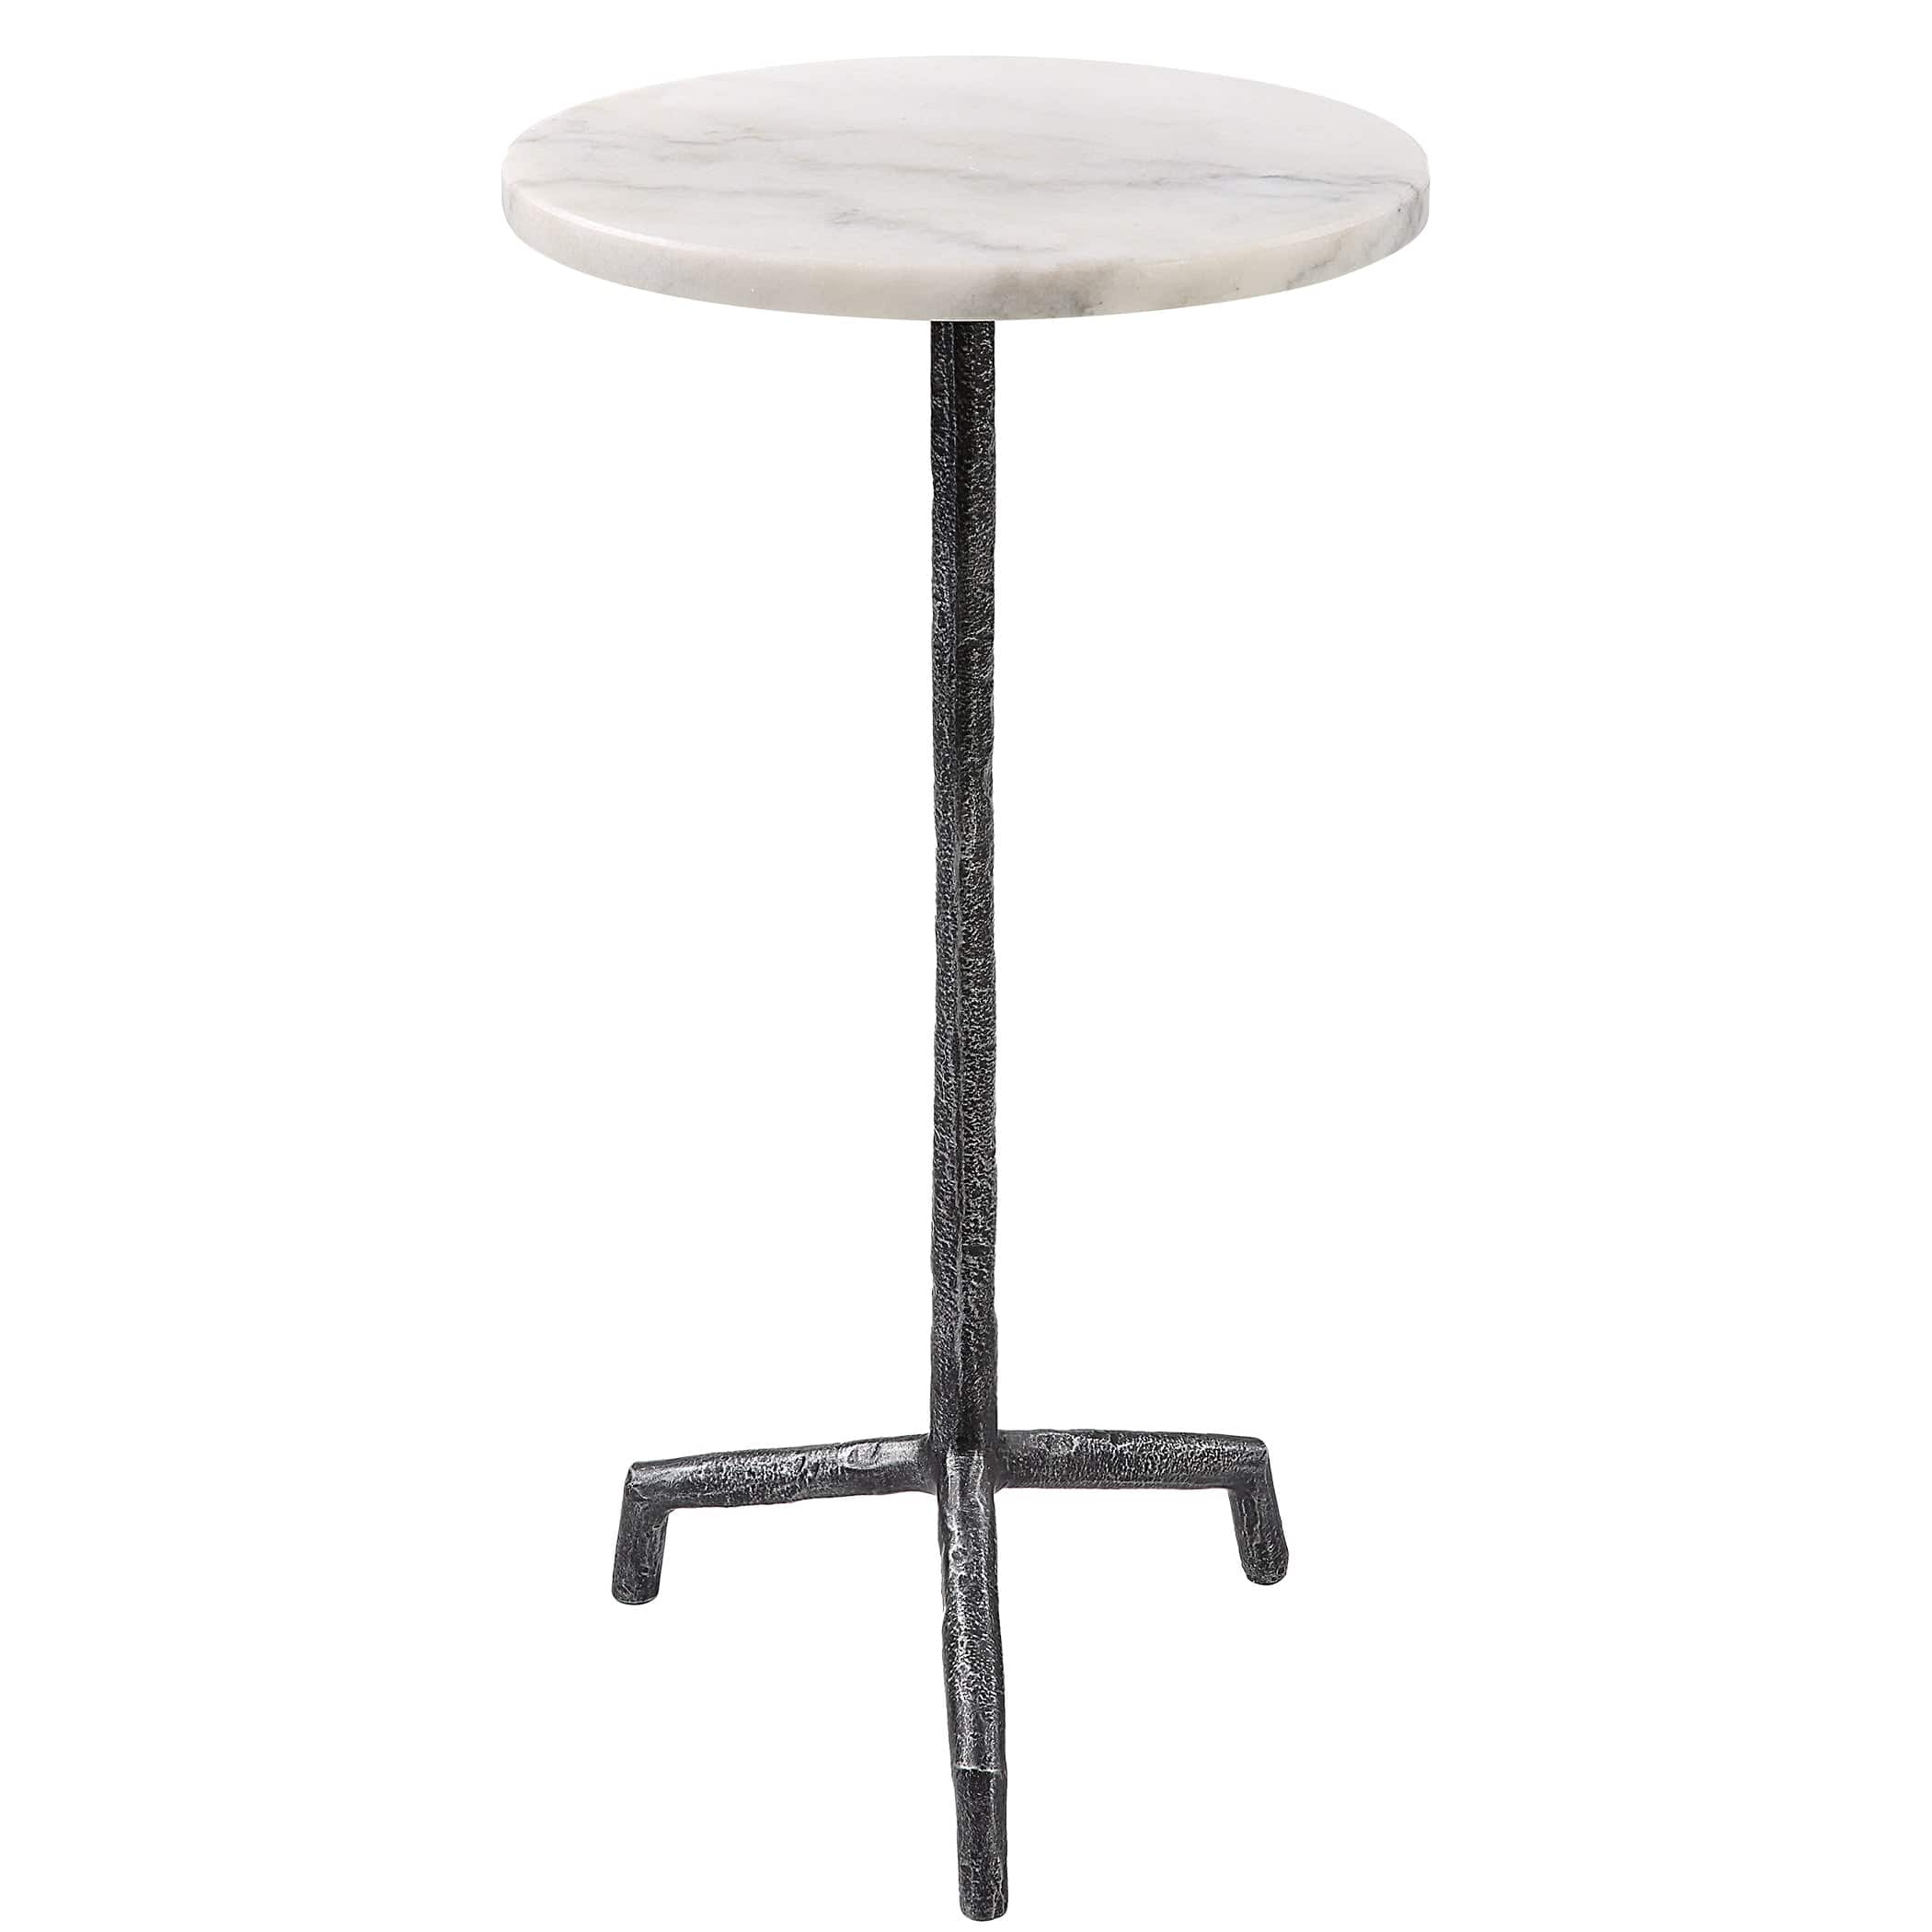 Puritan White Marble Drink Table Uttermost